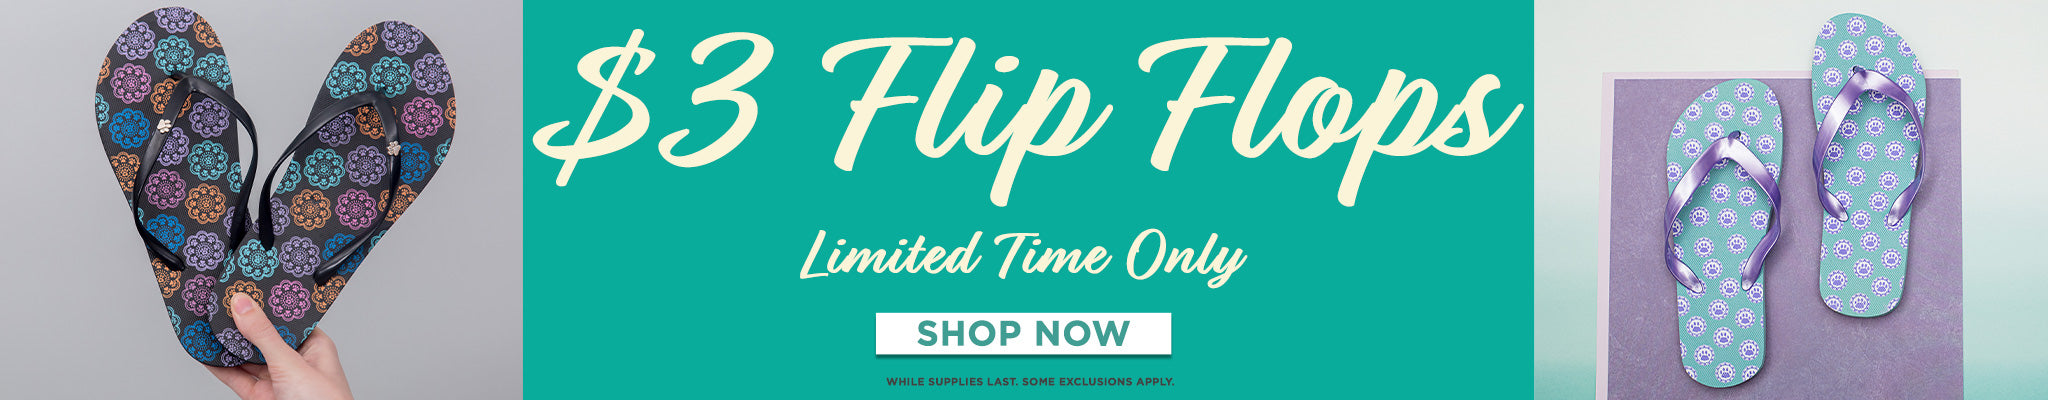 Don't Miss Out! $3 Flip Flops | Limited Time